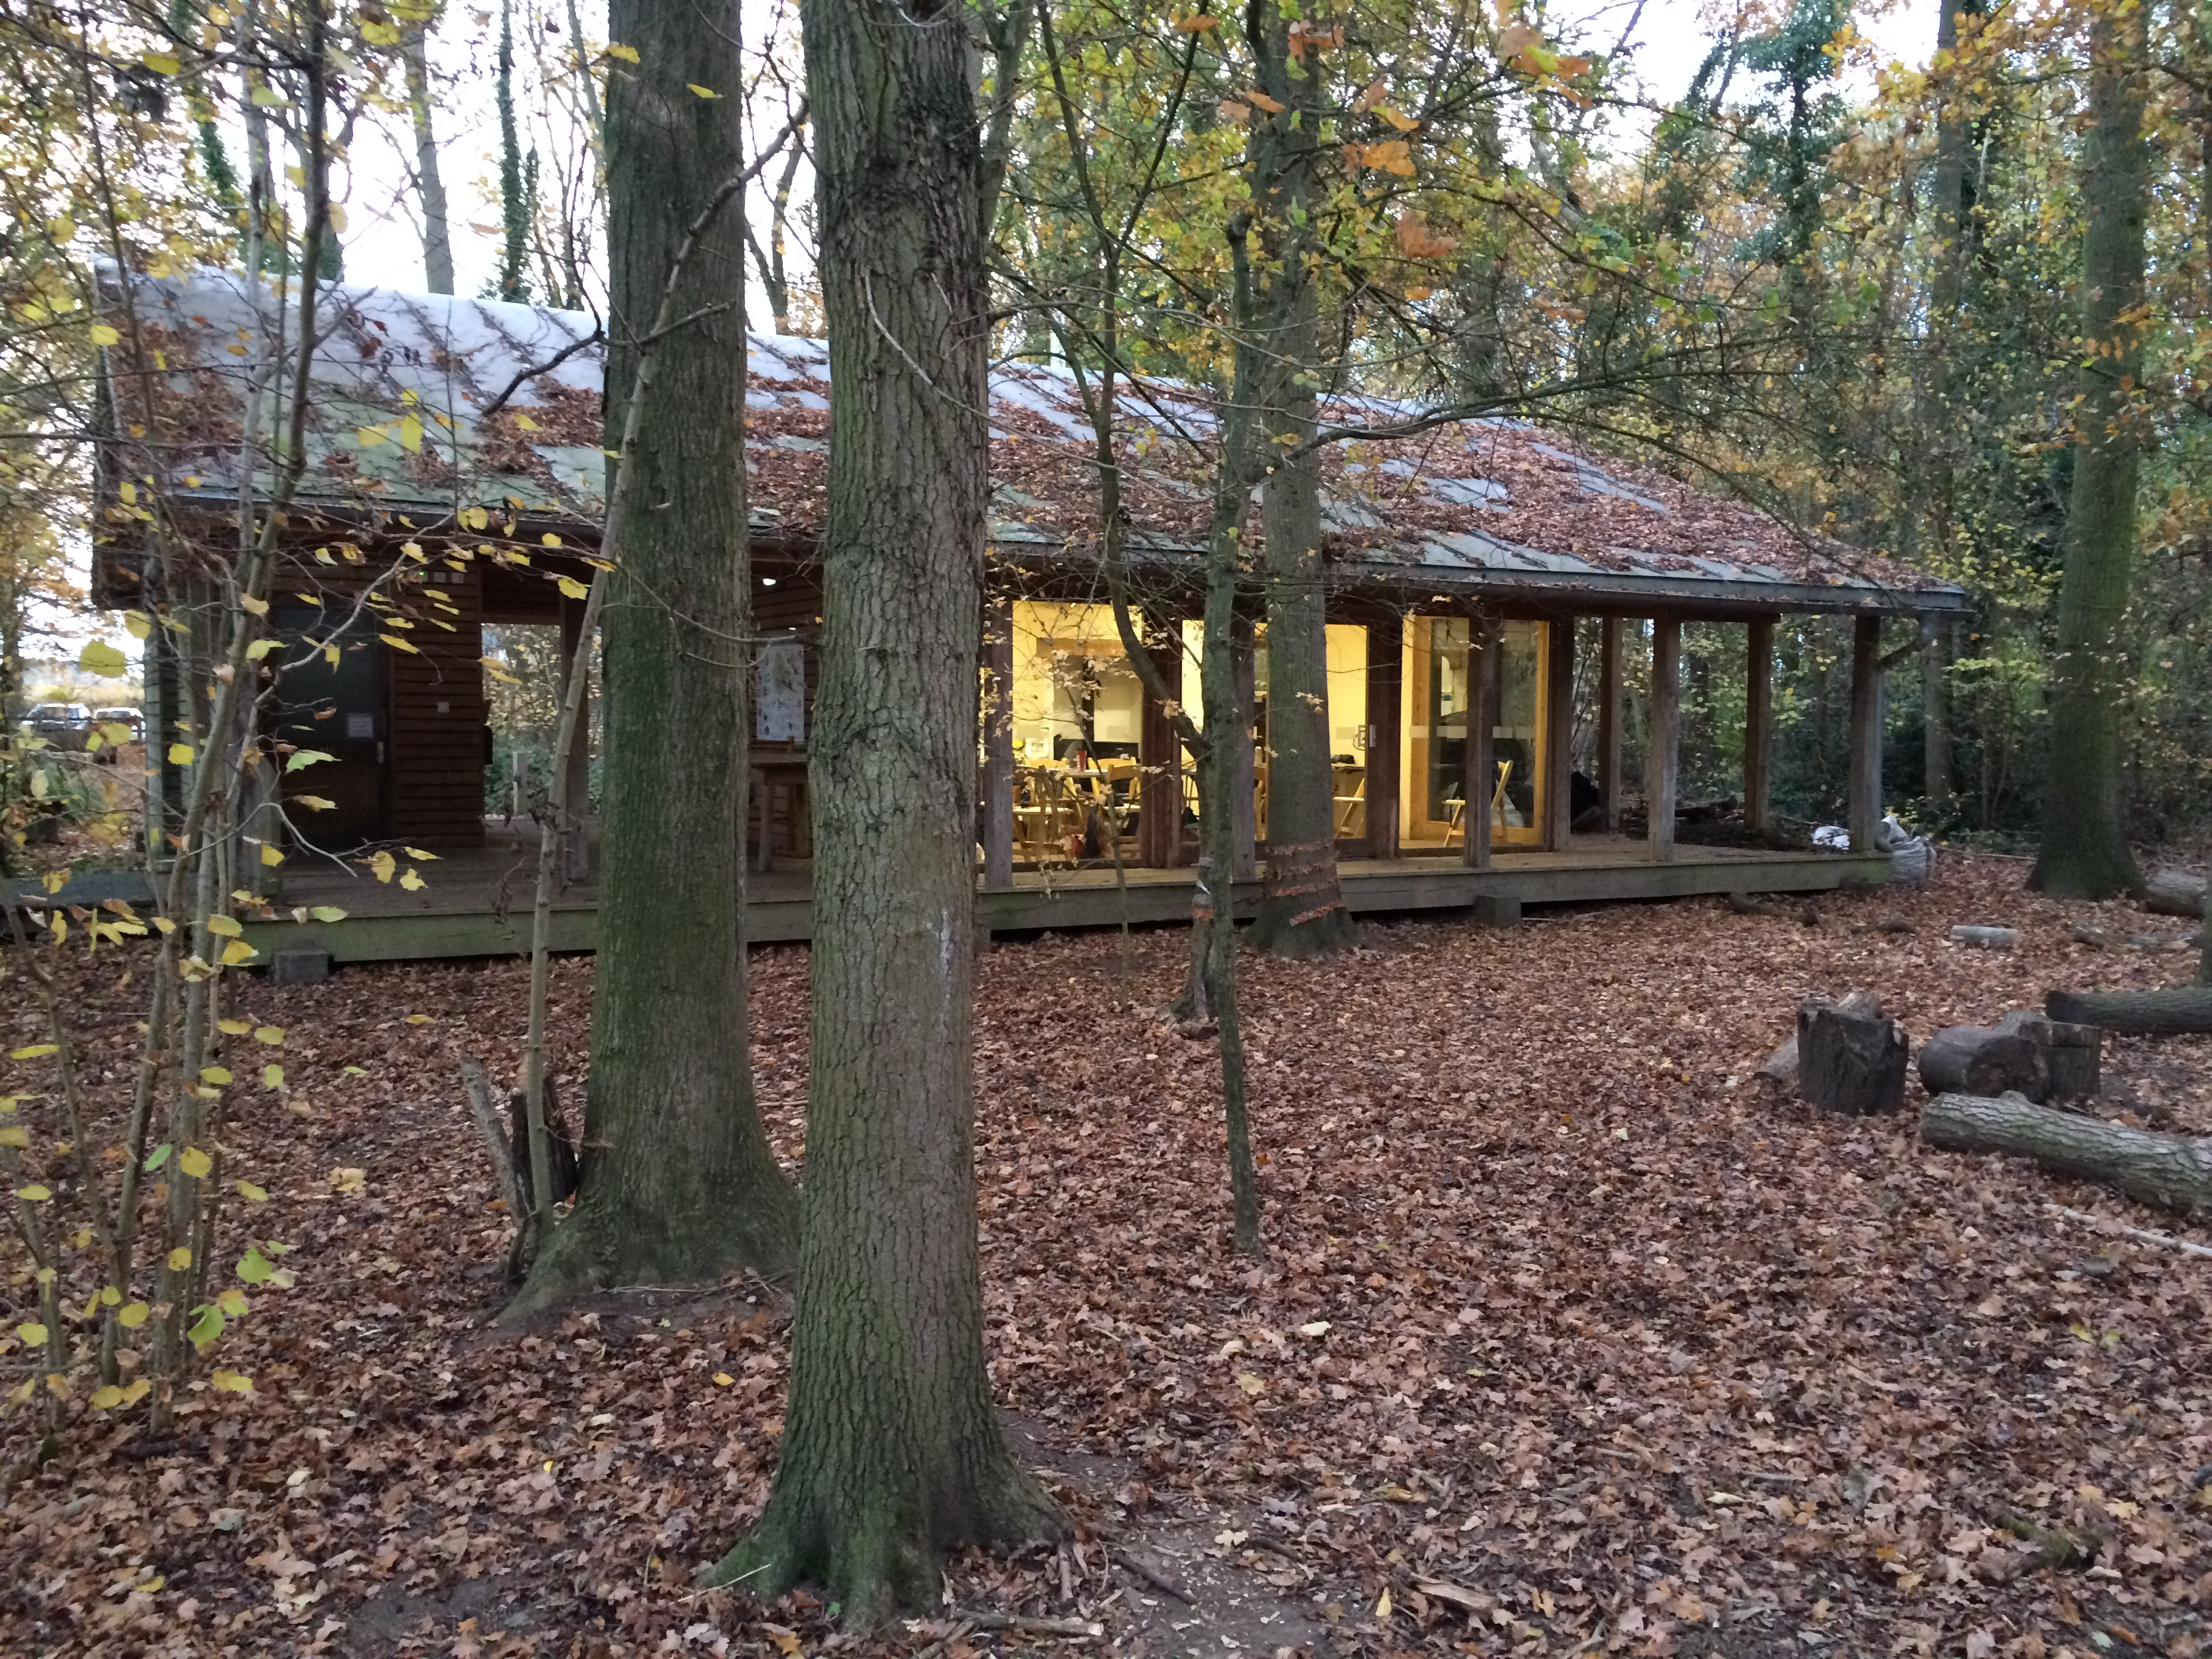 Bradfield Woods Education Centre: blending into the woods